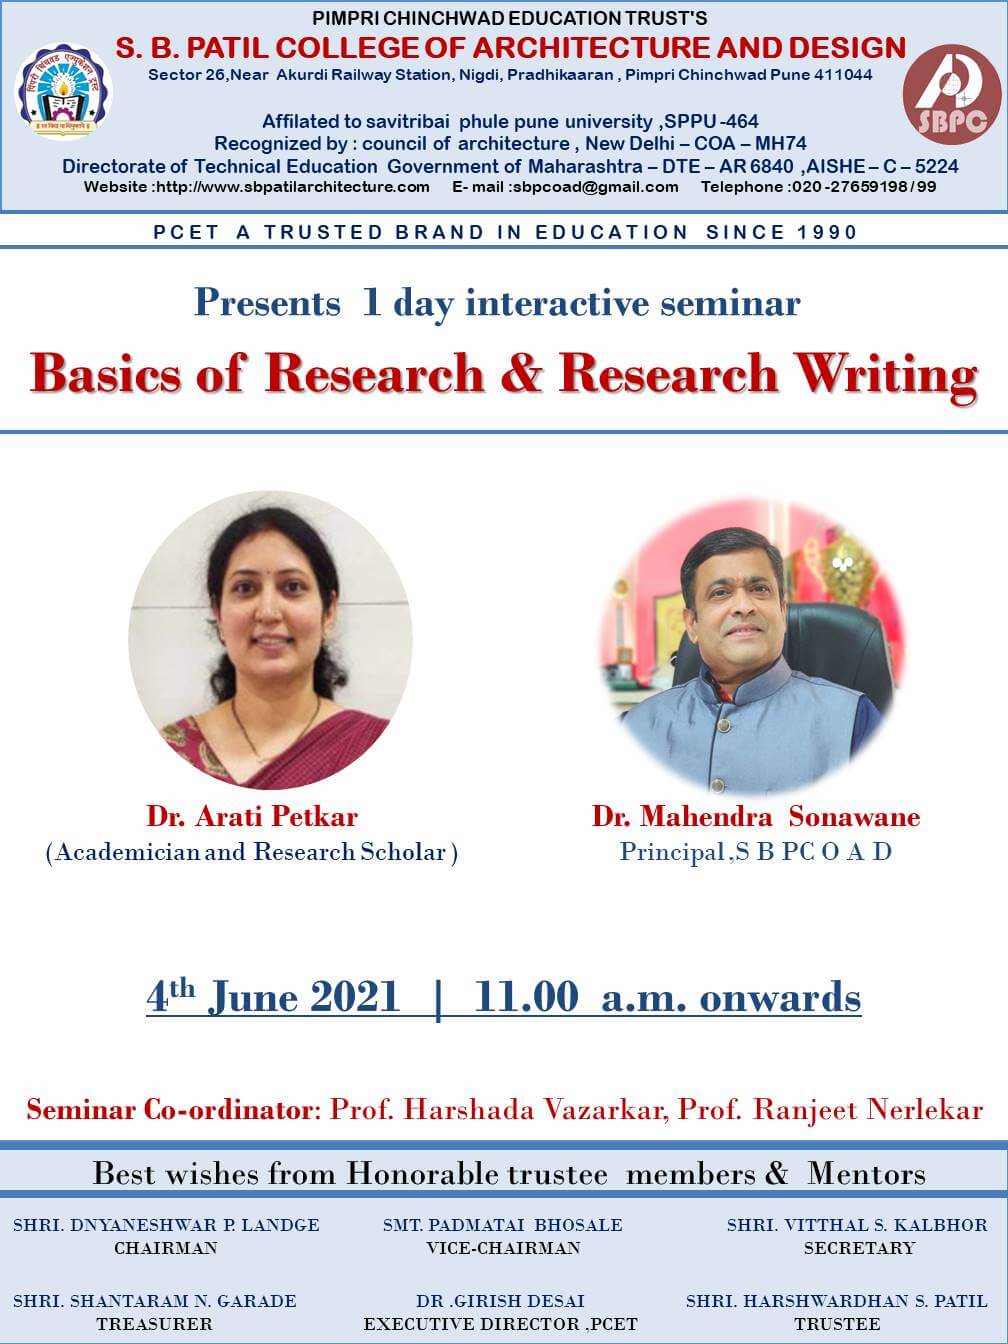 1 day interactive seminar on Basics of Research and Research writing